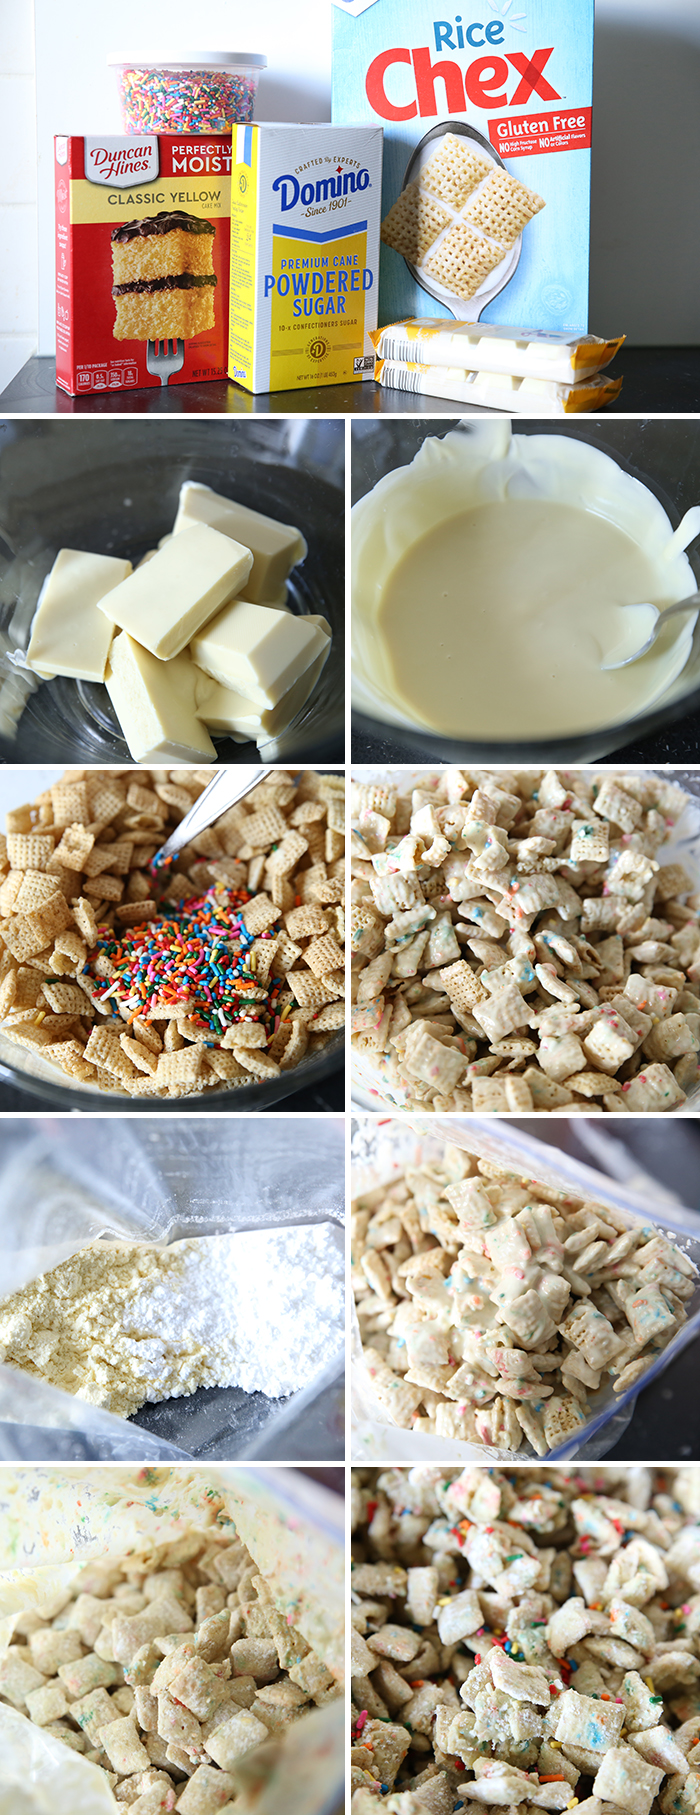 step by step pictures for how to make Funfetti Cake Mix muddy buddies